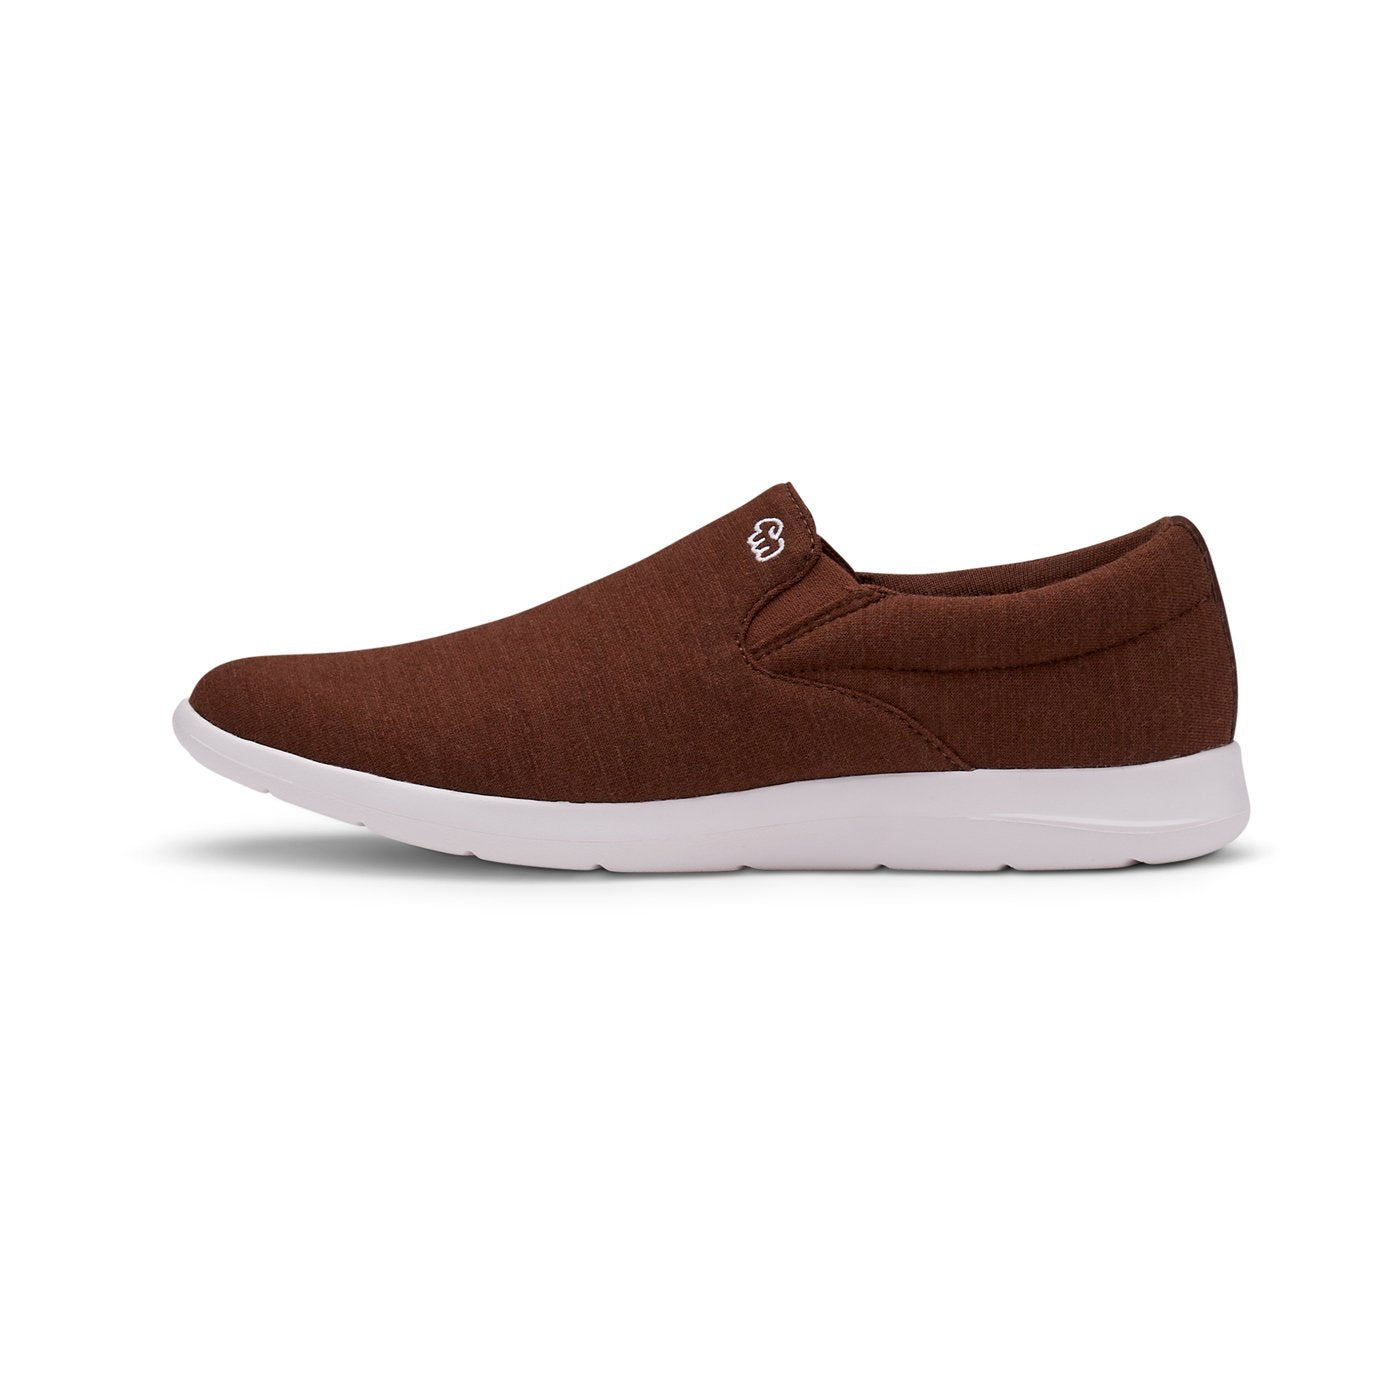 Women's Slip-Ons Brown - Special Offer